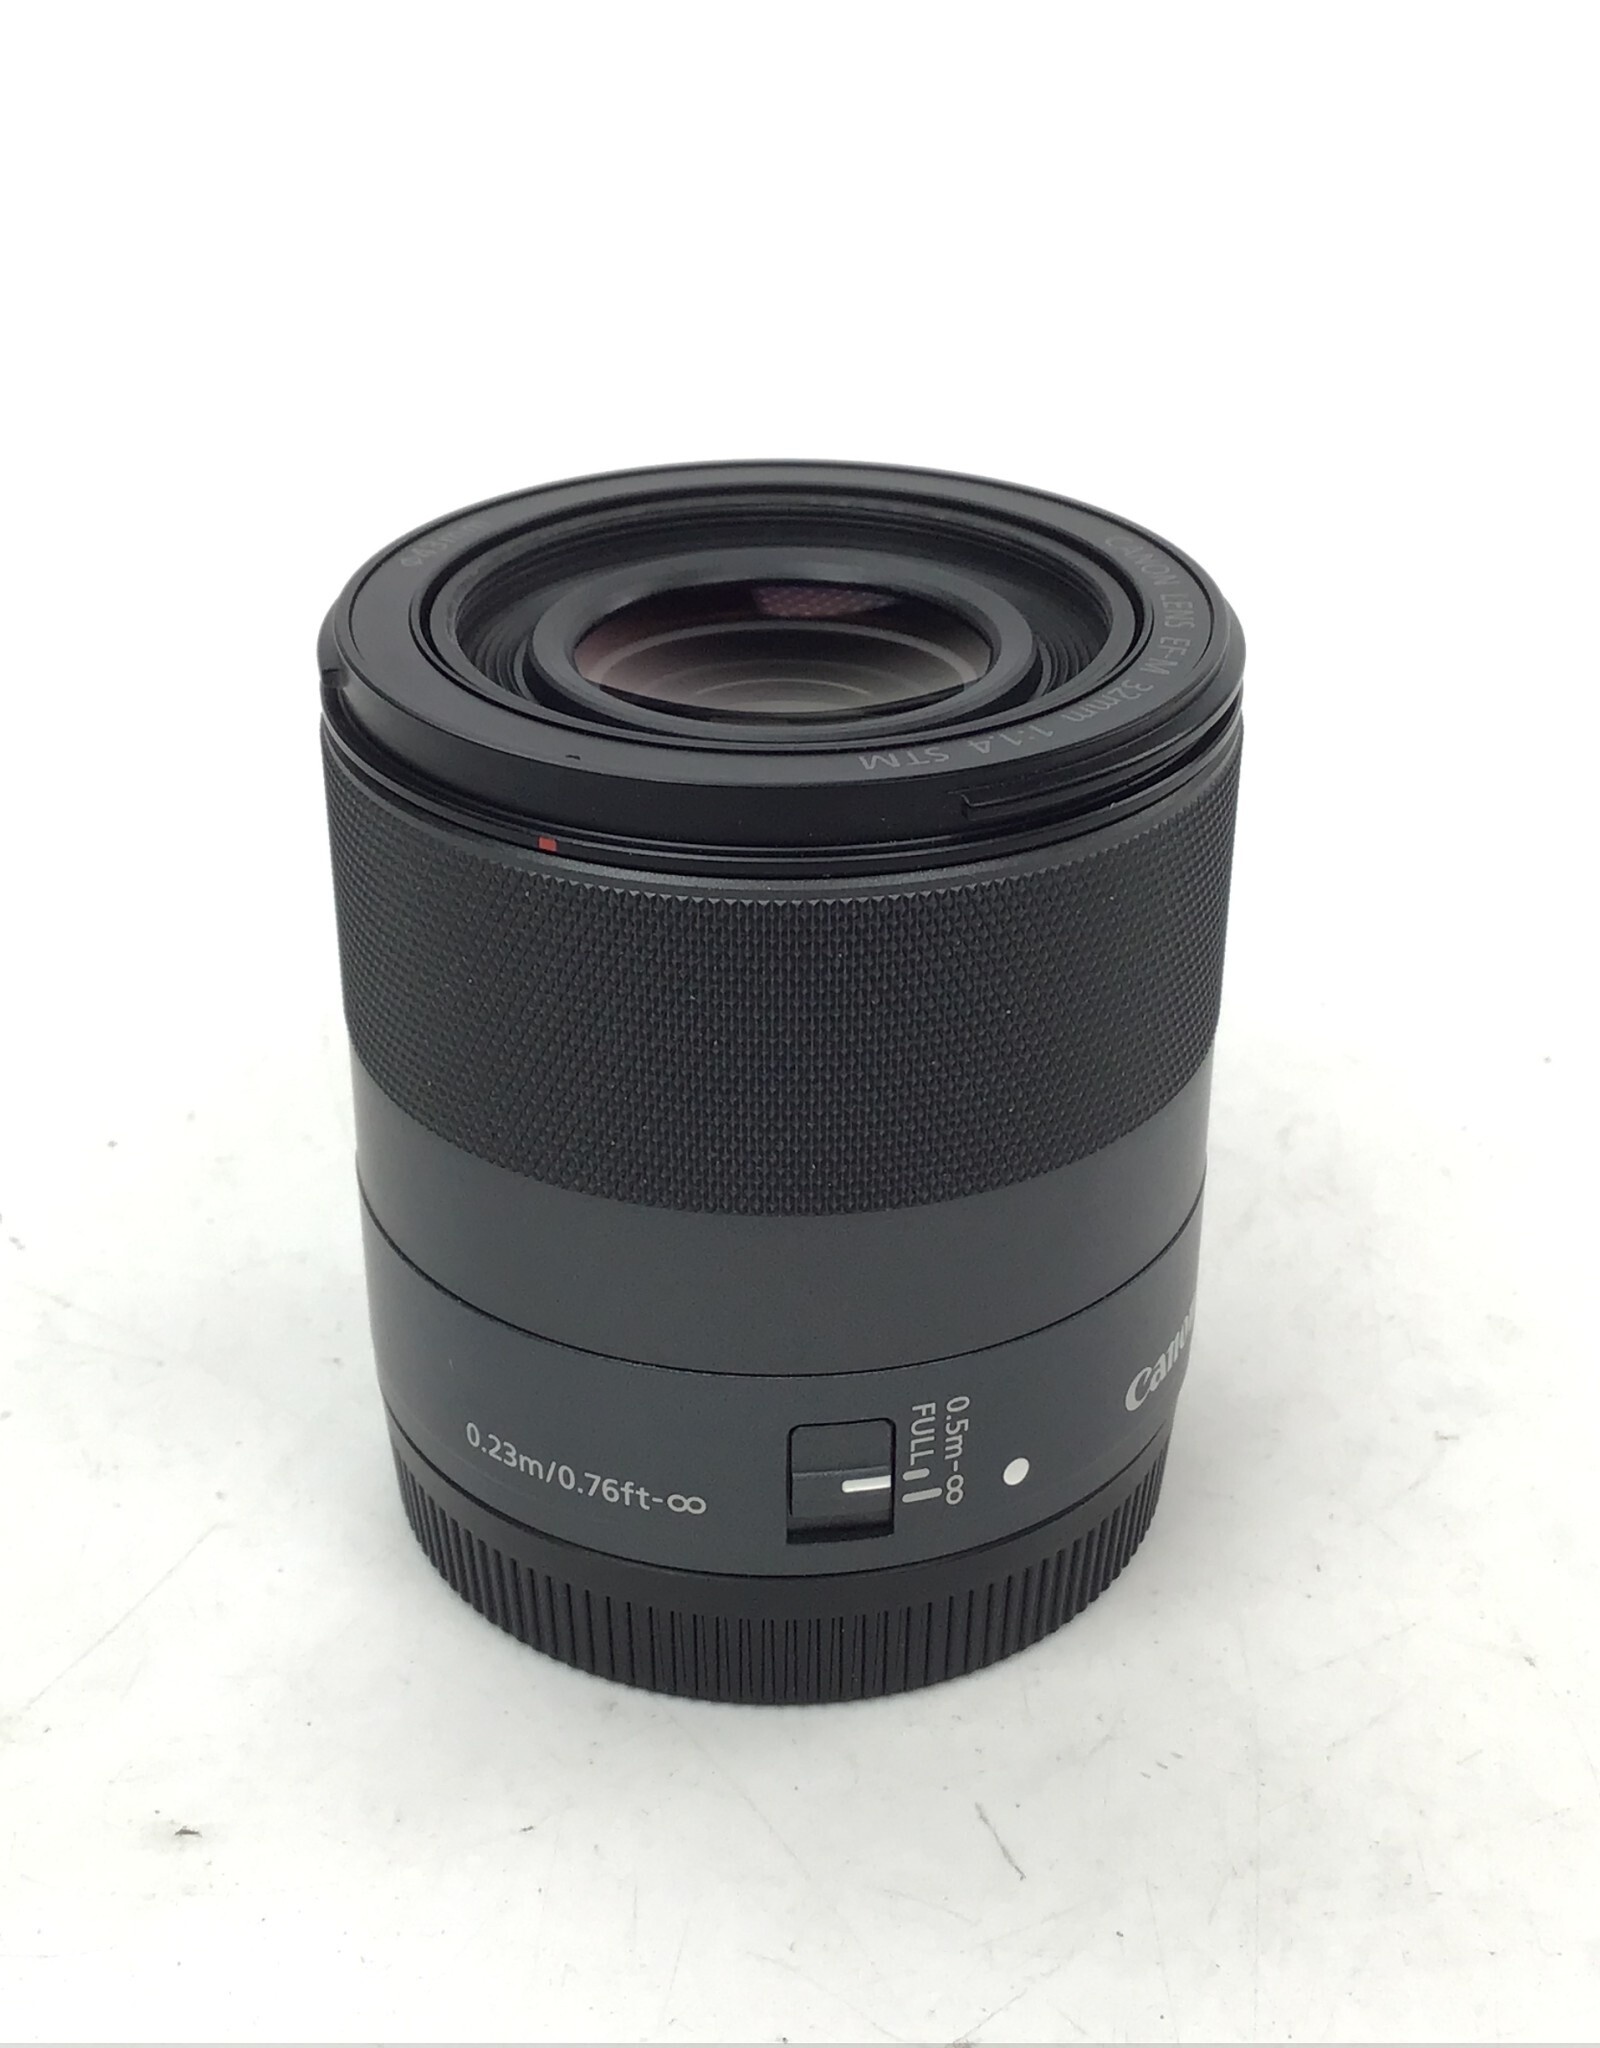 CANON Canon EFM 32mm f1.4 STM Lens in Box Used Good